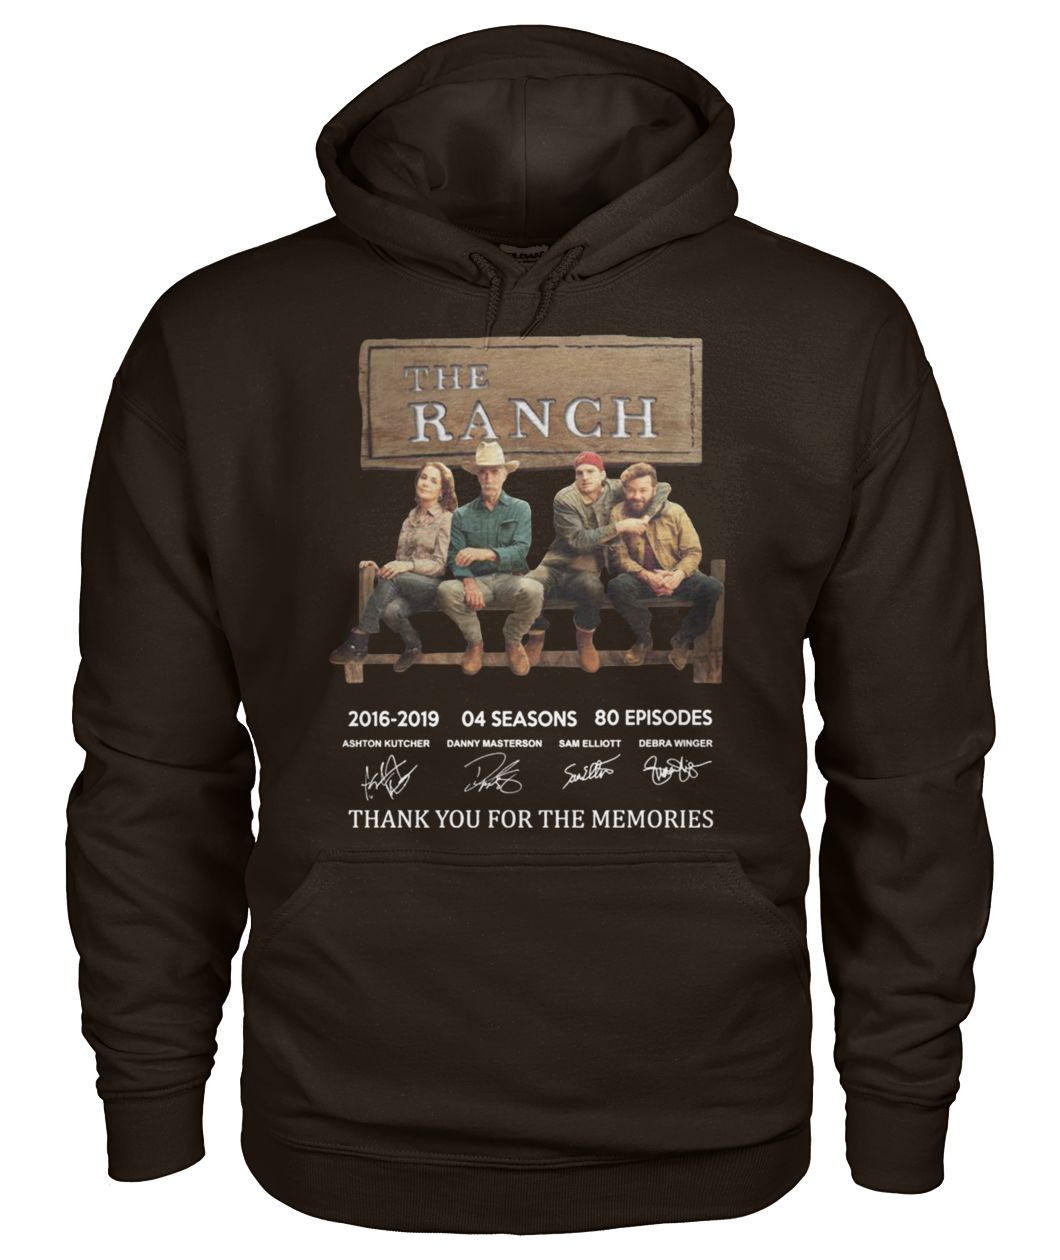 The ranch 2016 2019 04 seasons 80 episodes thank you for the memories signatures gildan hoodie